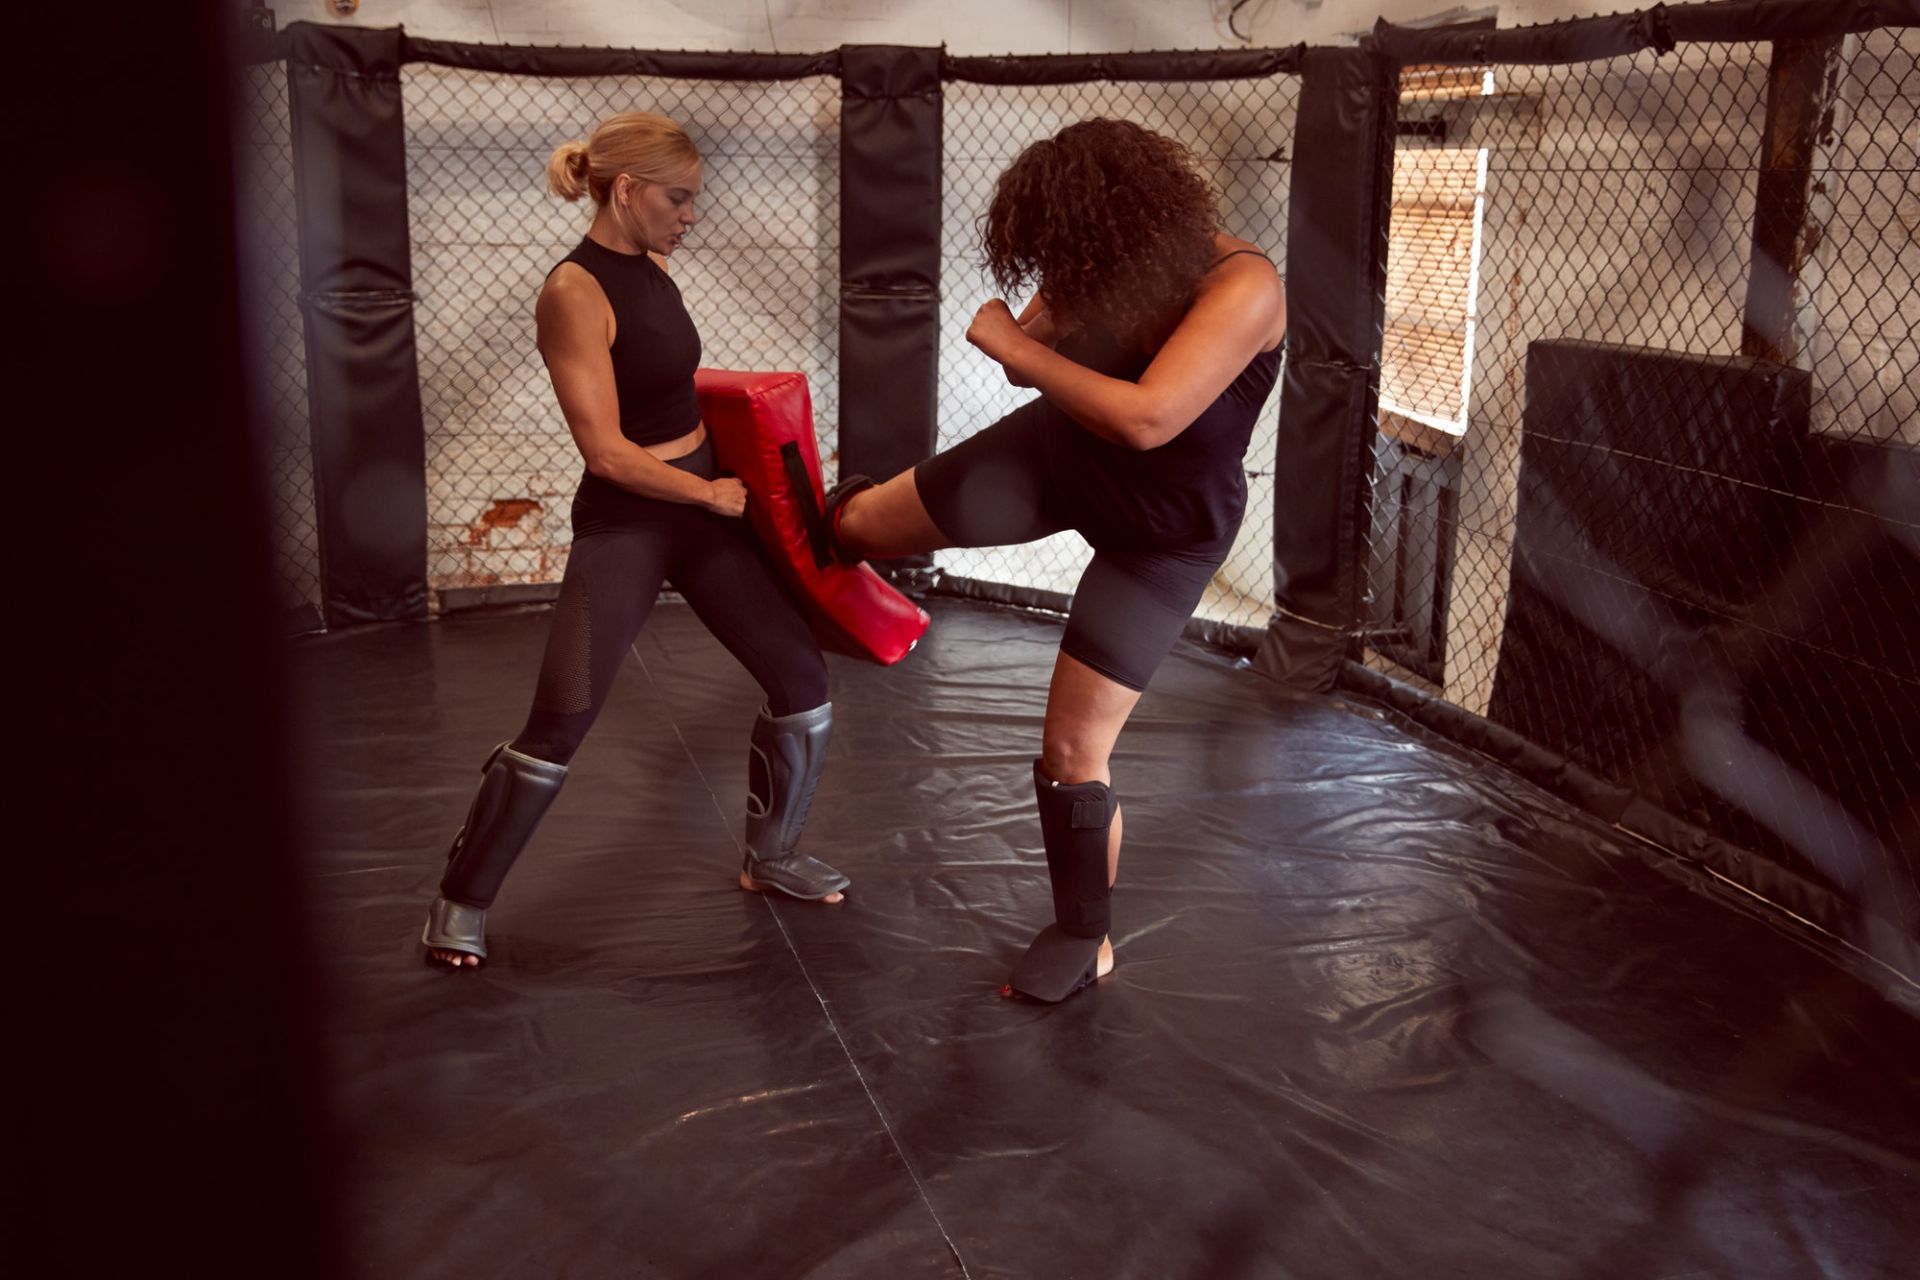 Two Female Mixed Martial Arts Fighters Kick Boxing Training In Gym